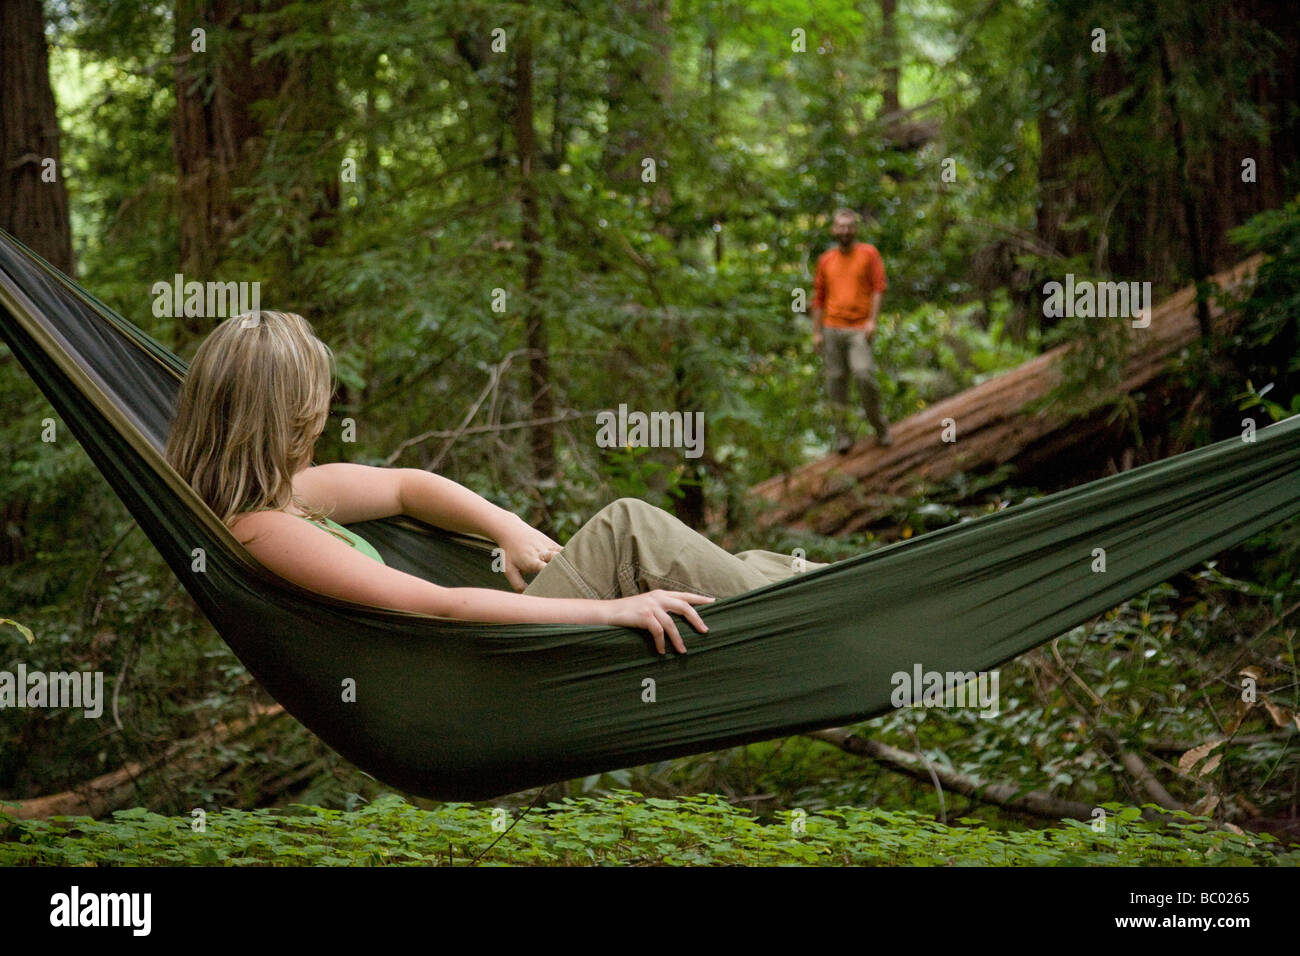 A woman relaxing in a hammock with a man walking on a log in the distance in the woods. Stock Photo